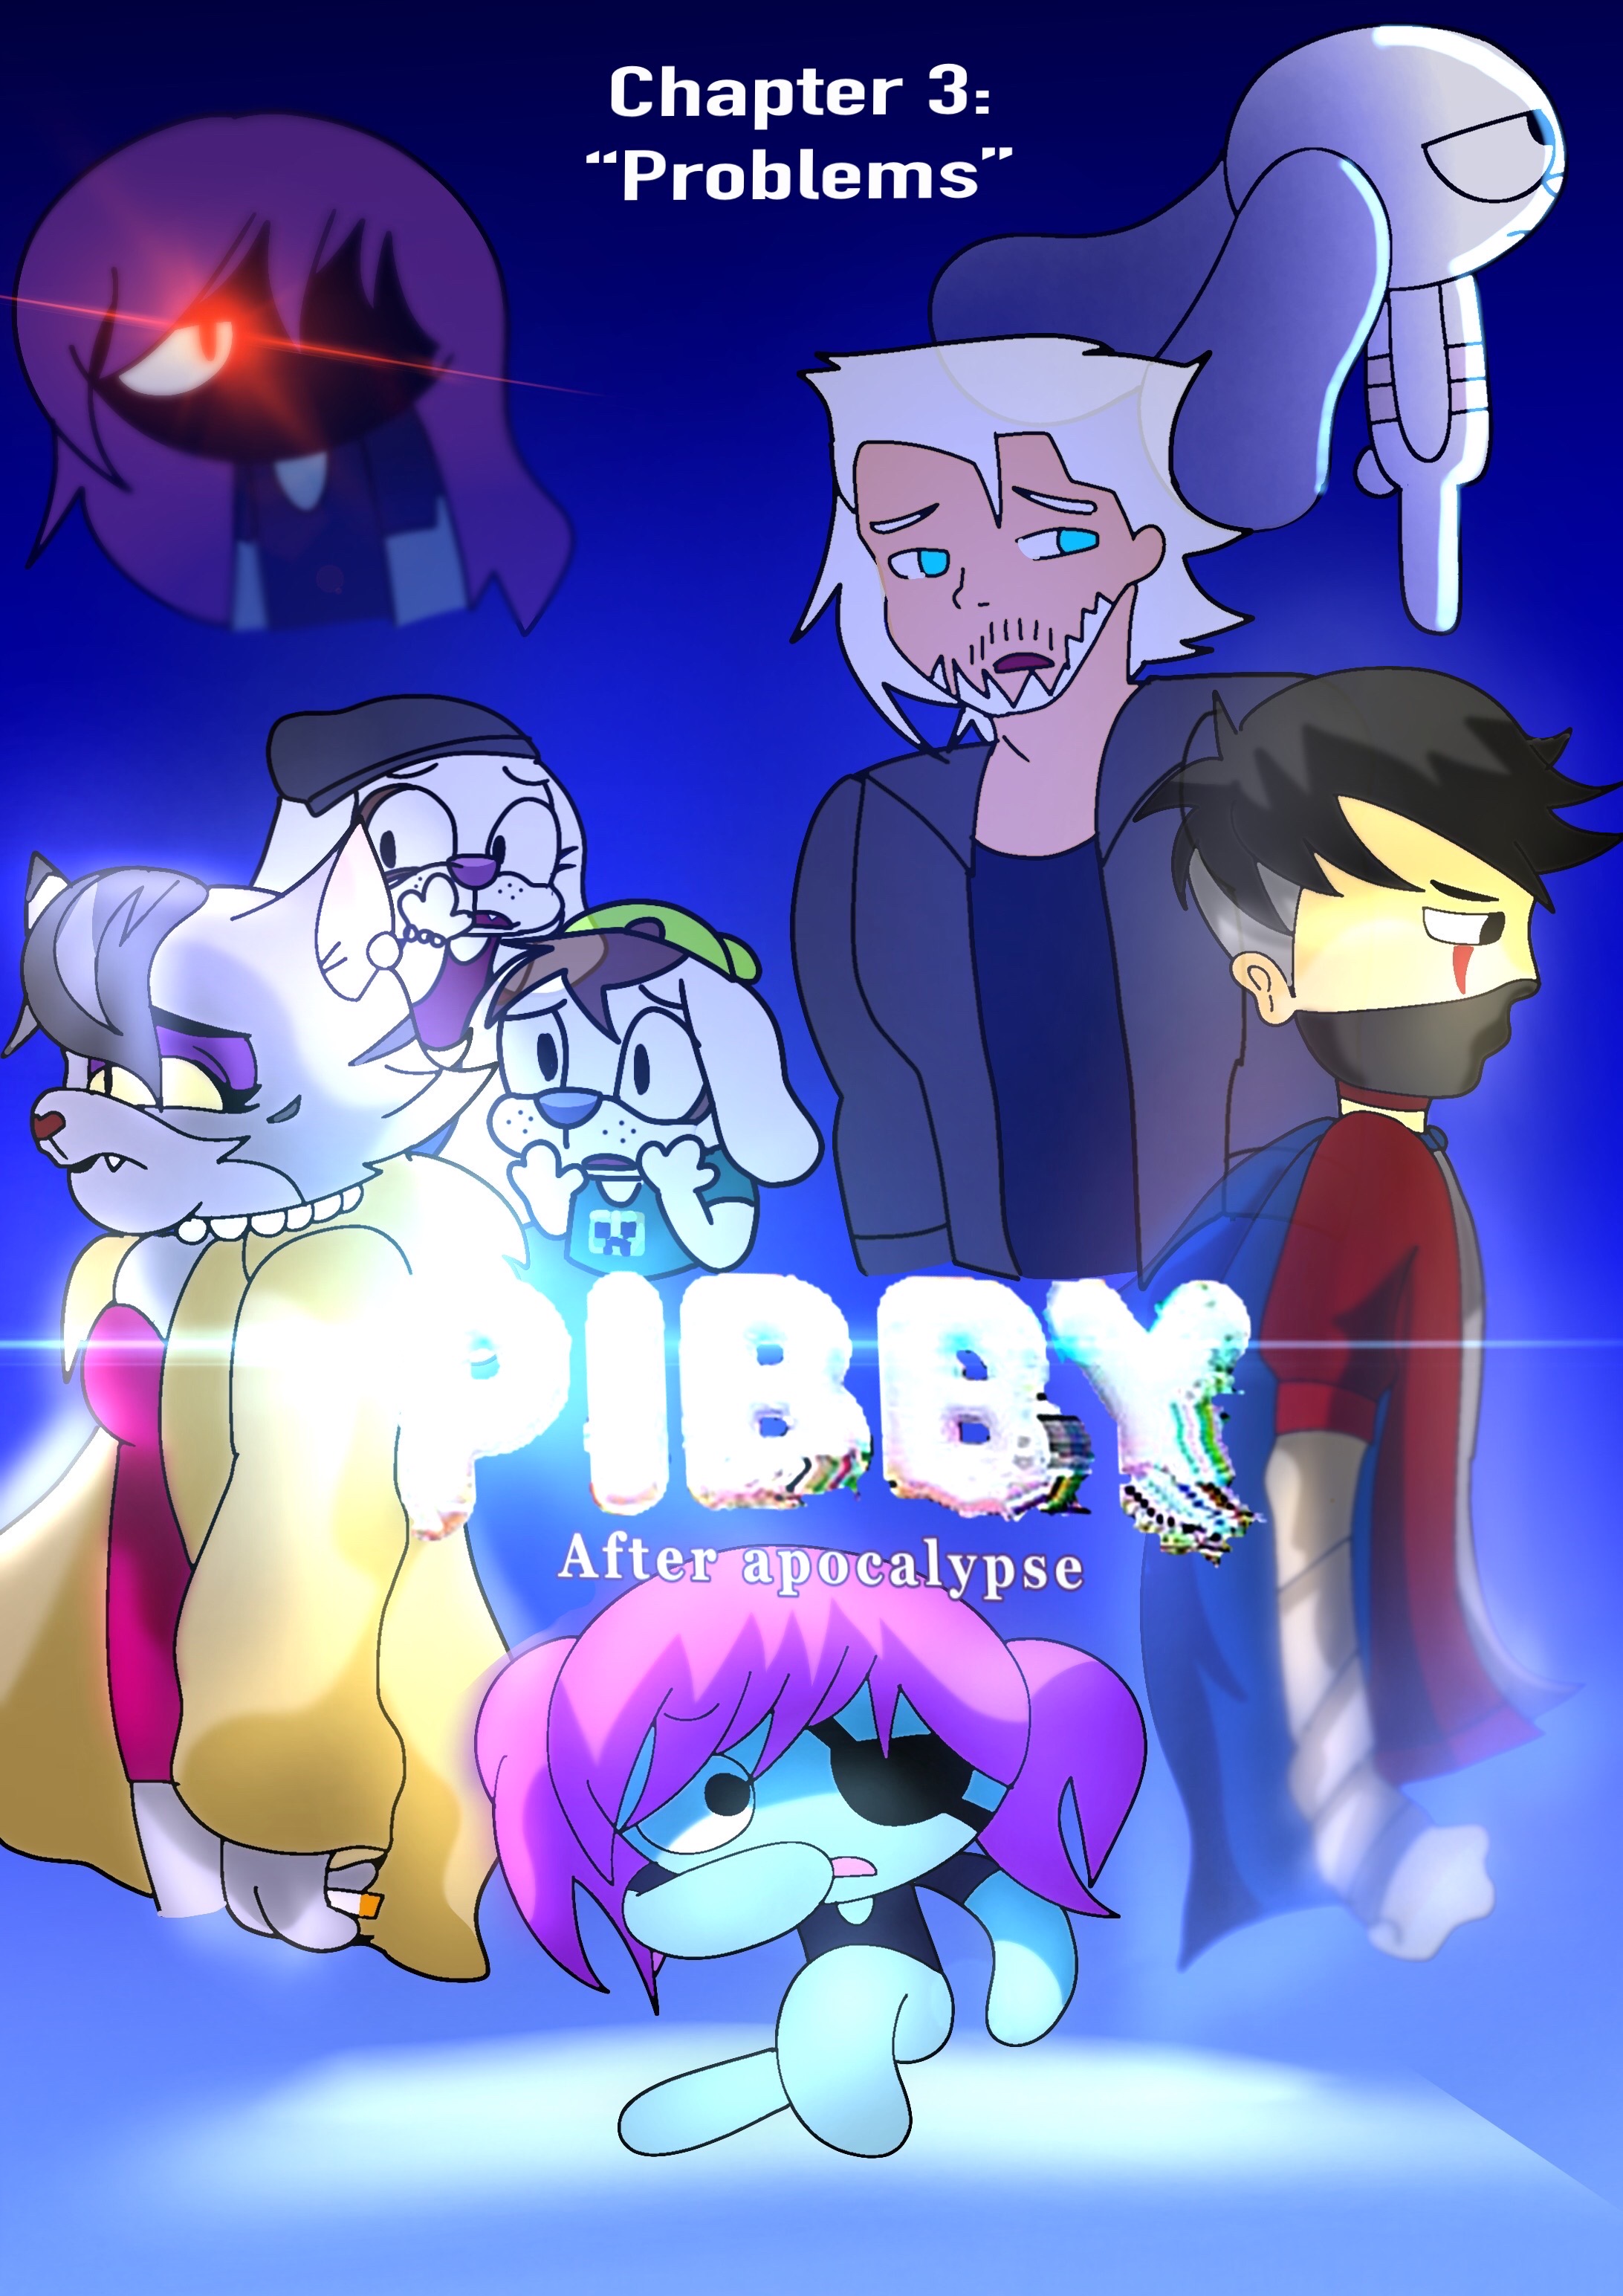 Pibby: Apocalypse on X: Repost cuz I didn't properly give credits